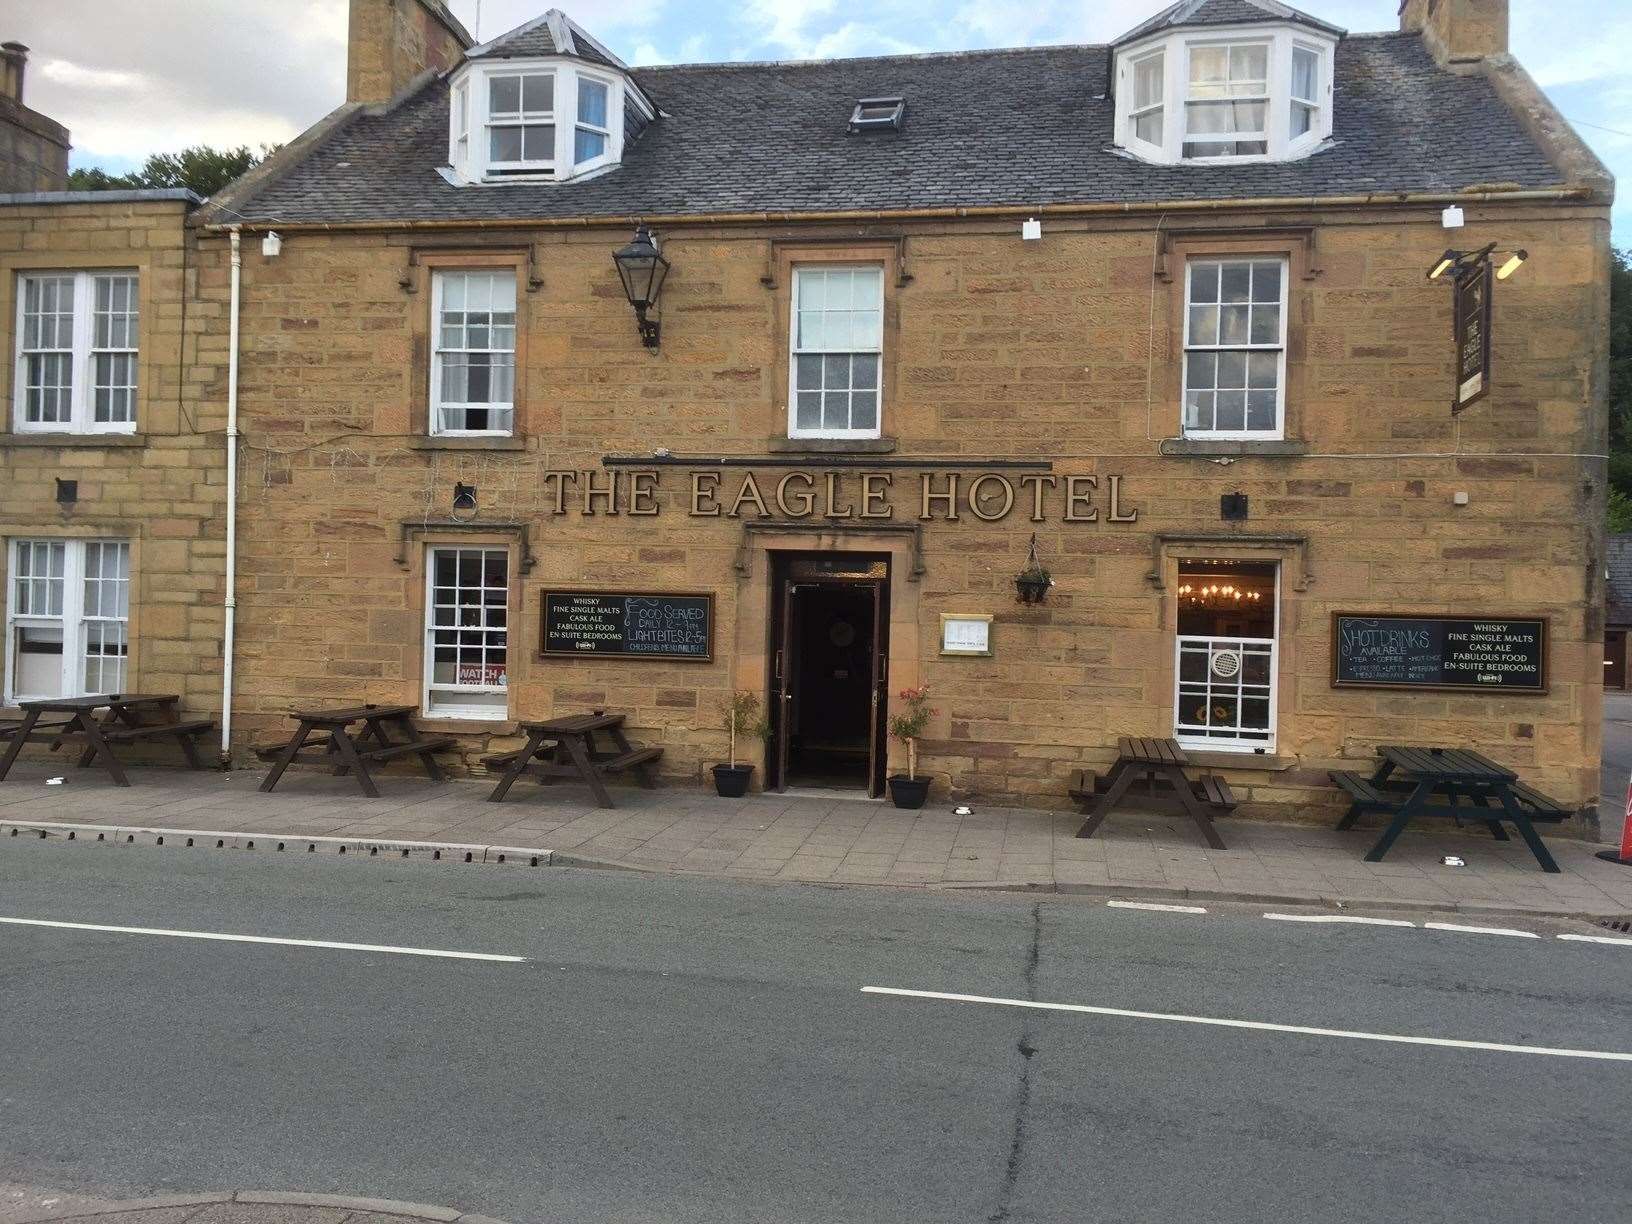 The Eagle Hotel in Dornoch is a hub of the community.